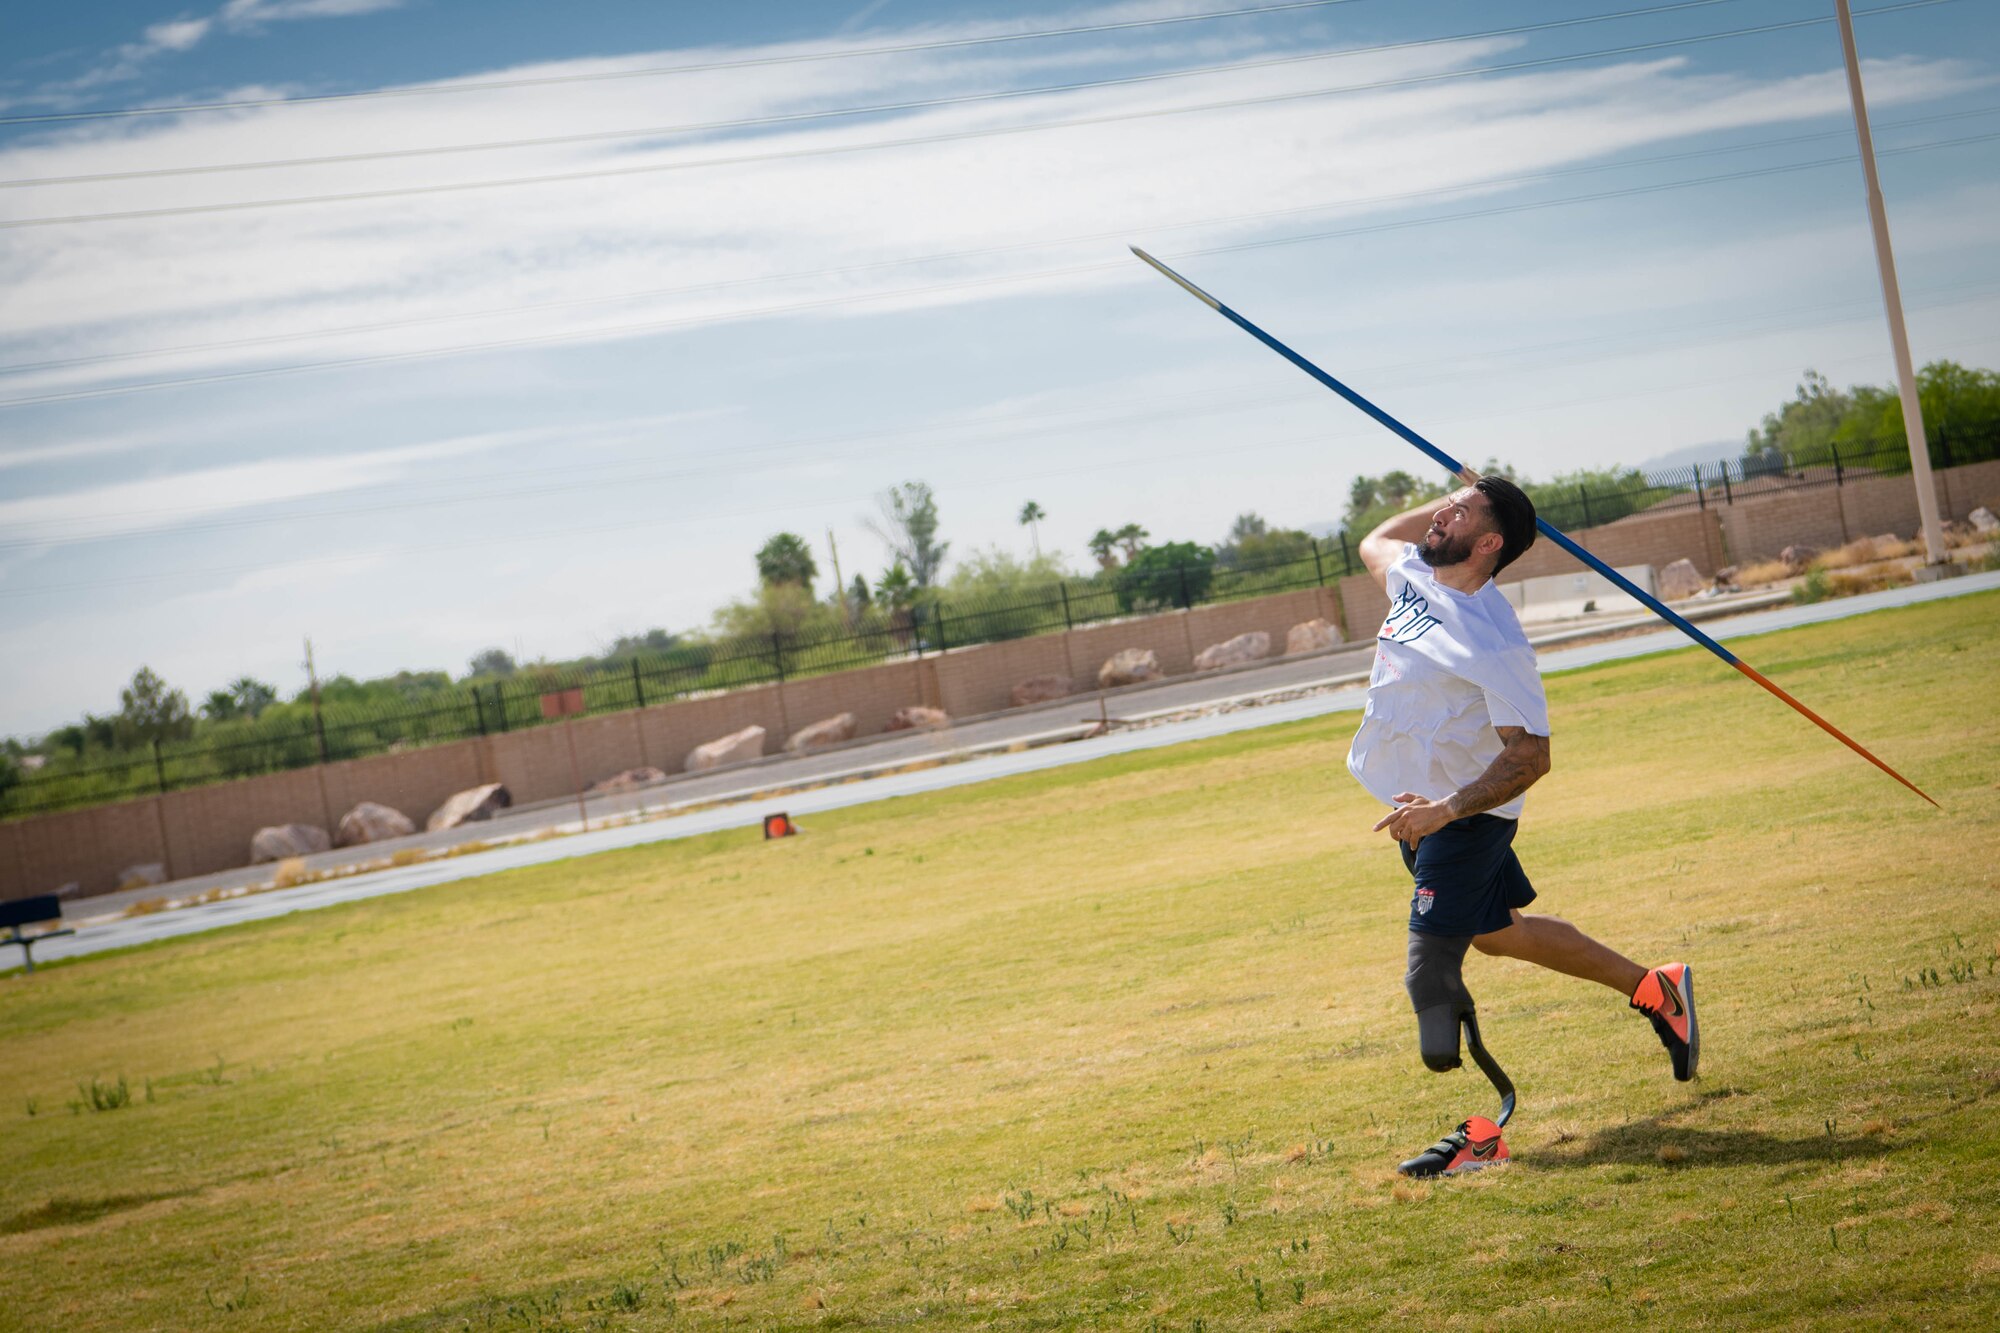 Retired U.S. Army Sgt. Michael Gallardo throws a javelin during the Desert Challenge Track and Field Training Camp May 26, 2021, at Luke Air Force Base, Arizona.